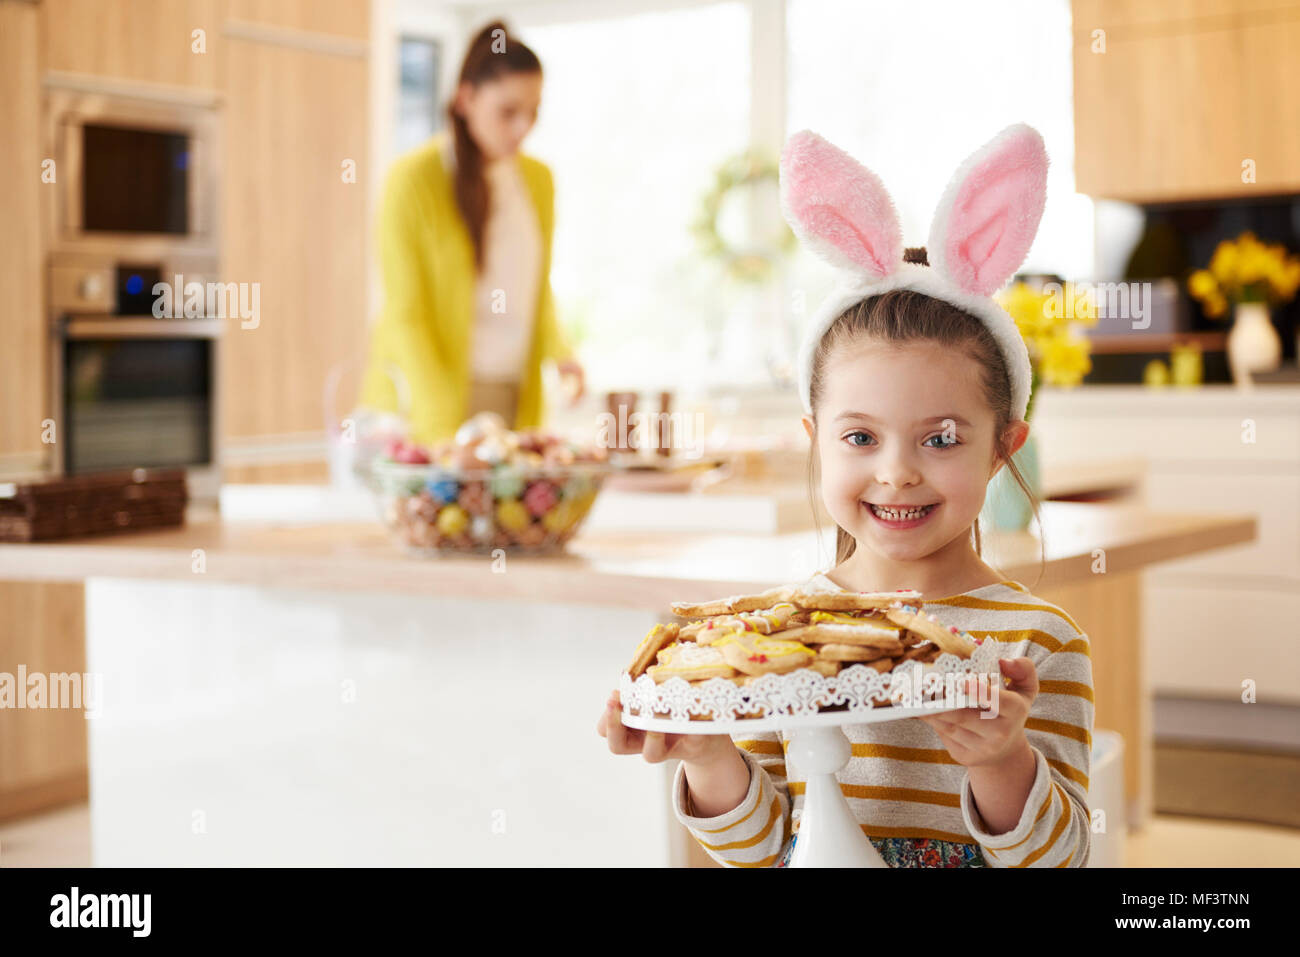 Portrait of smiling girl with bunny ears serving cookies Stock Photo